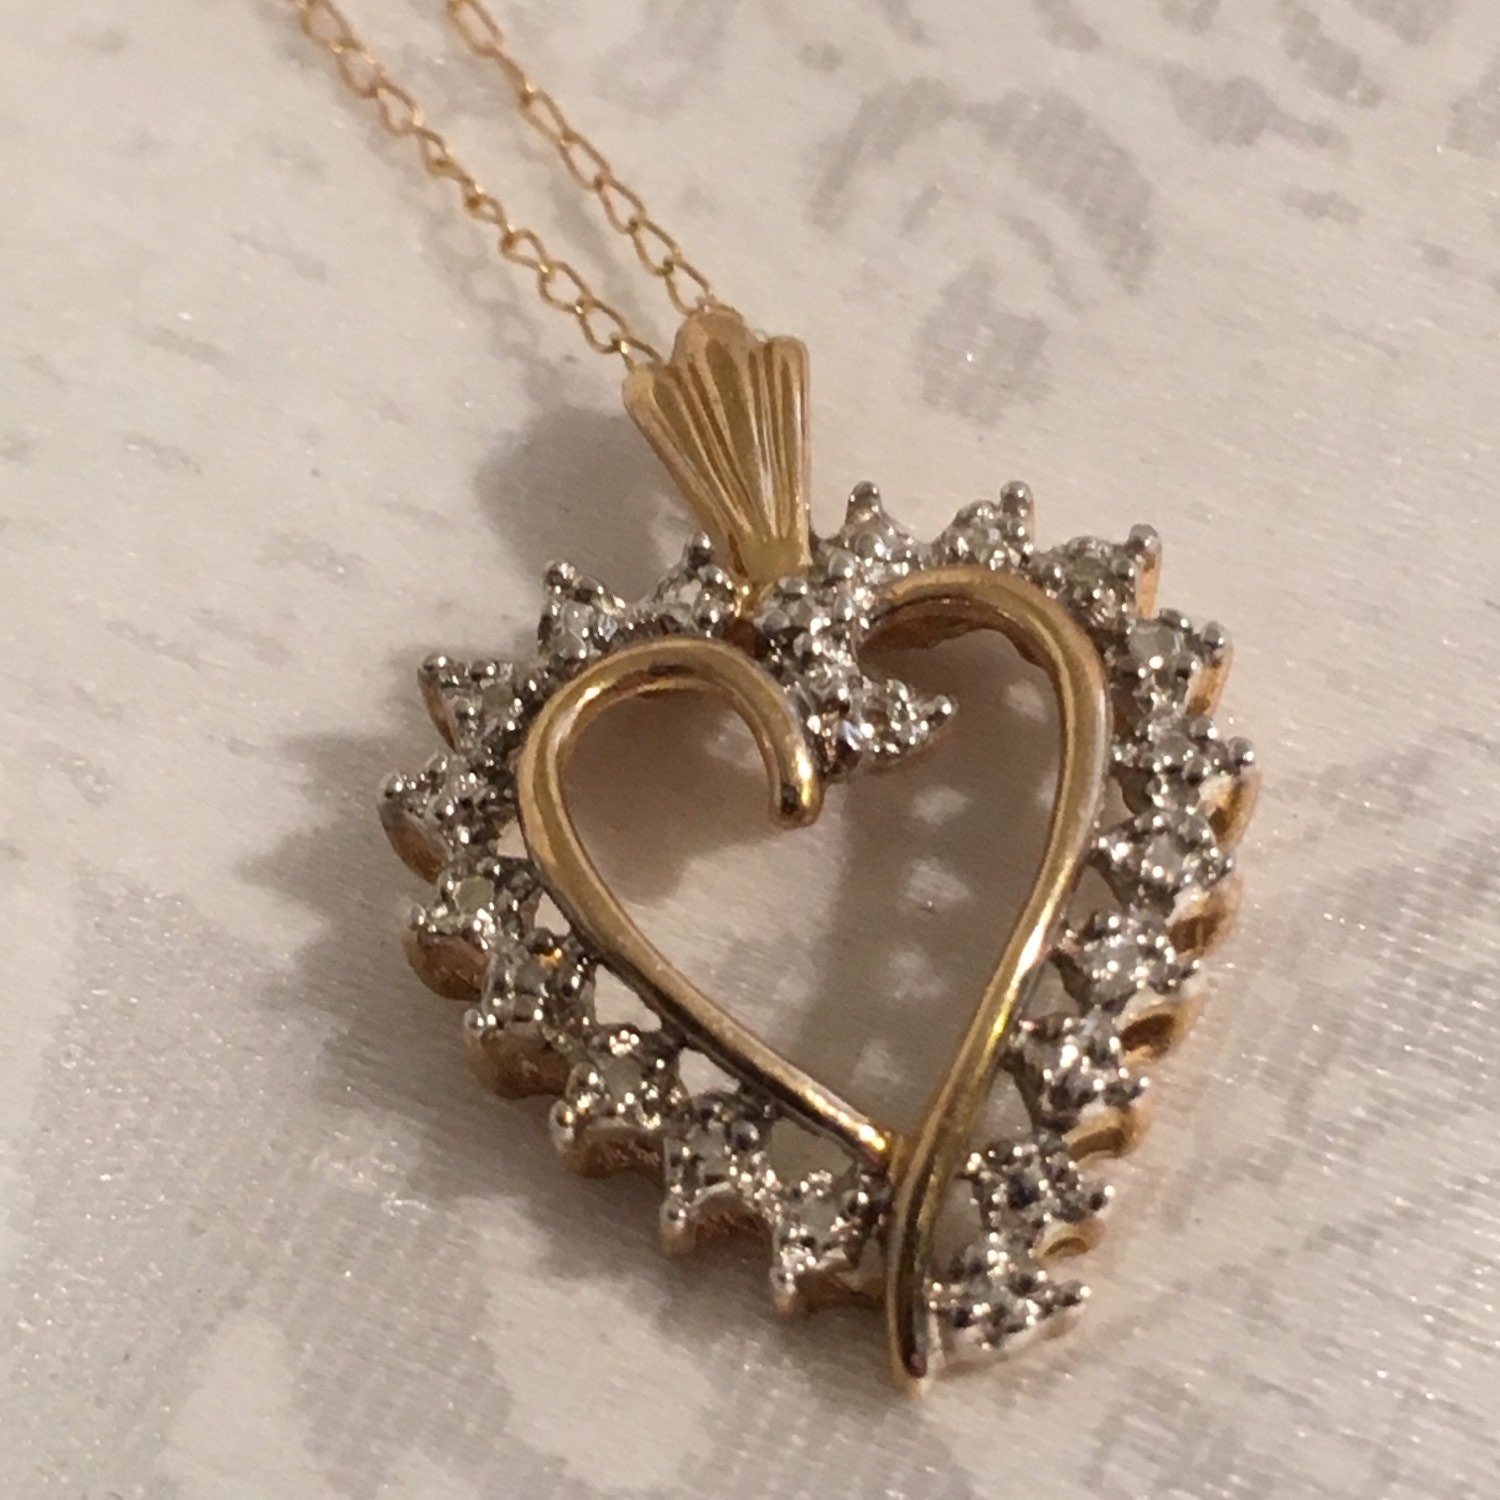 10K Solid Yellow Gold Heart Charm Pendant Necklace by JewelryGeeks